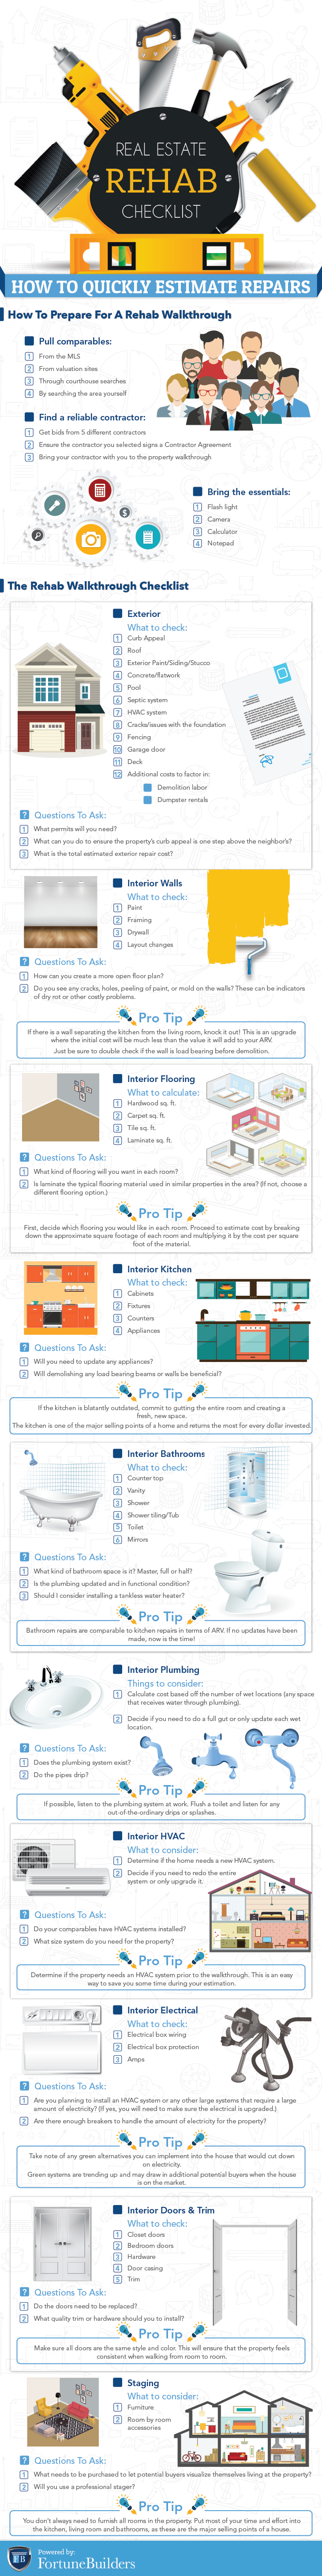 House Rehab Checklist For Savvy Investors Fortunebuilders,Furnishing A New Home